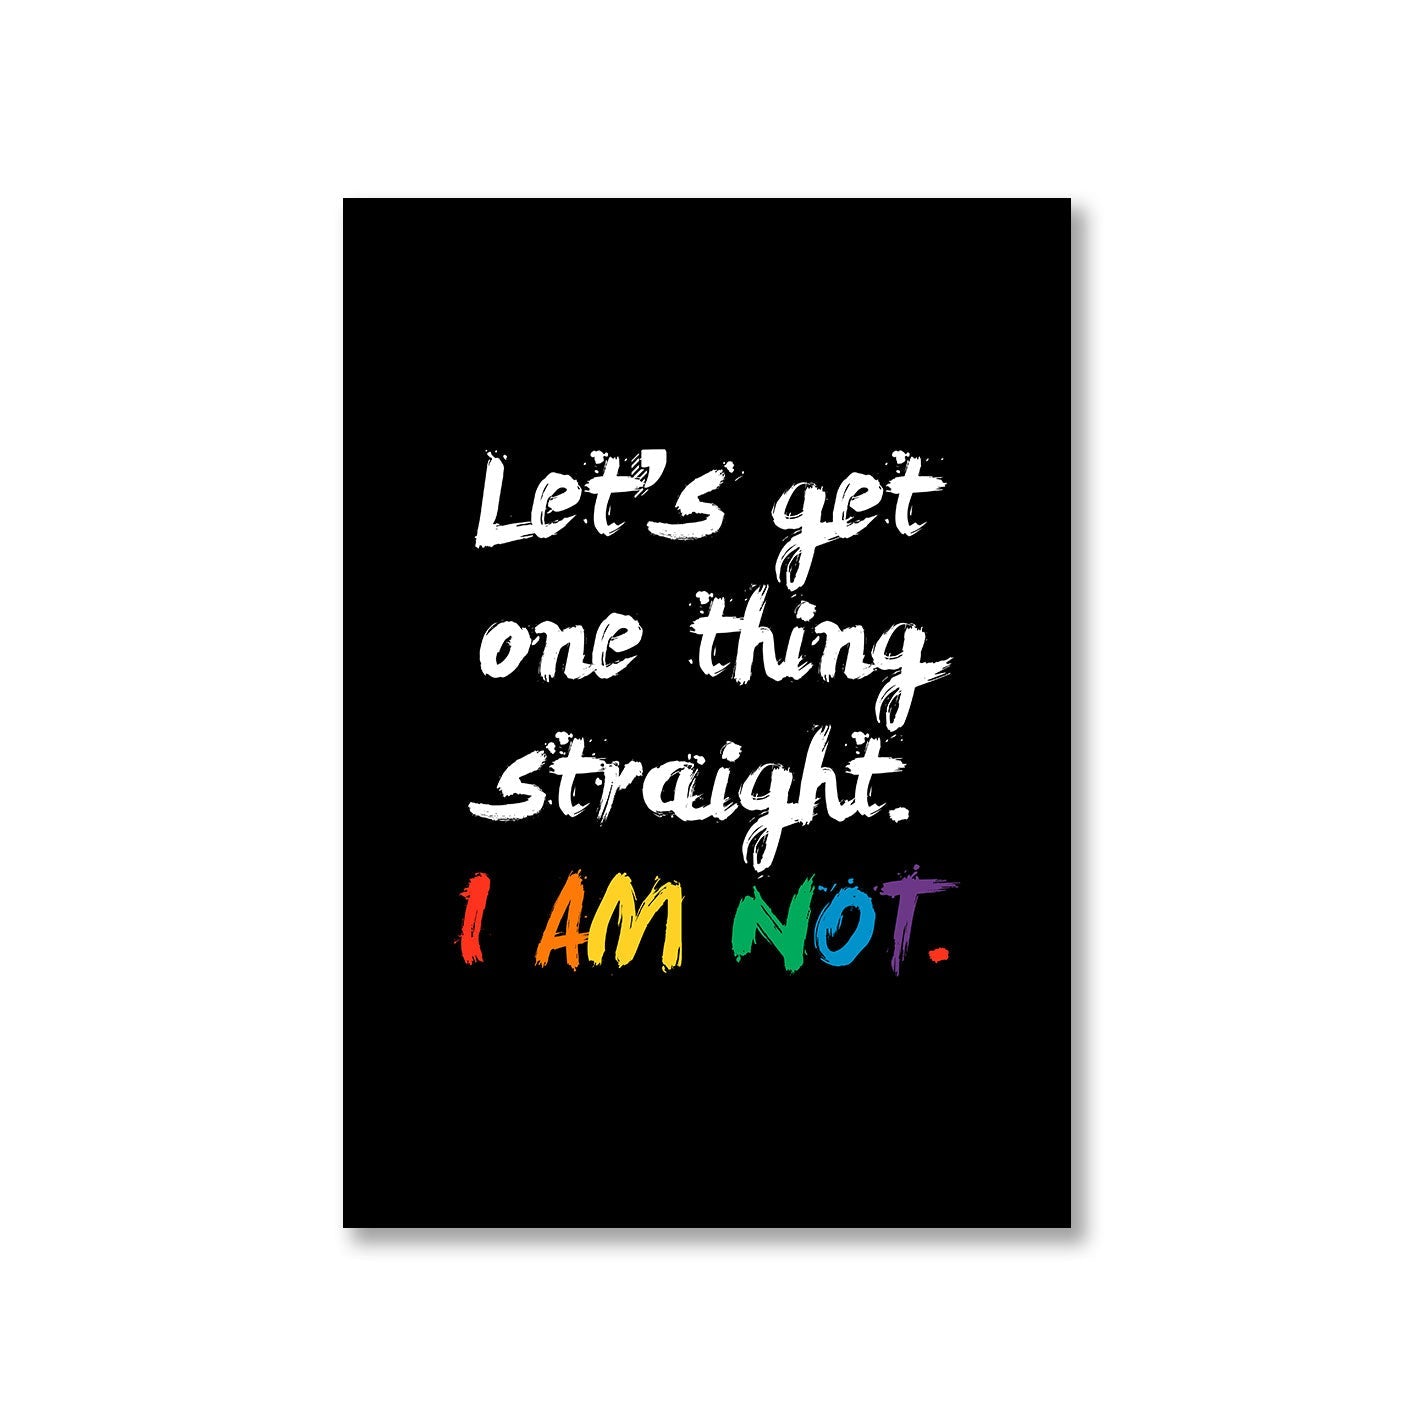 pride let's get one thing straight poster wall art buy online india the banyan tee tbt a4 - lgbtqia+